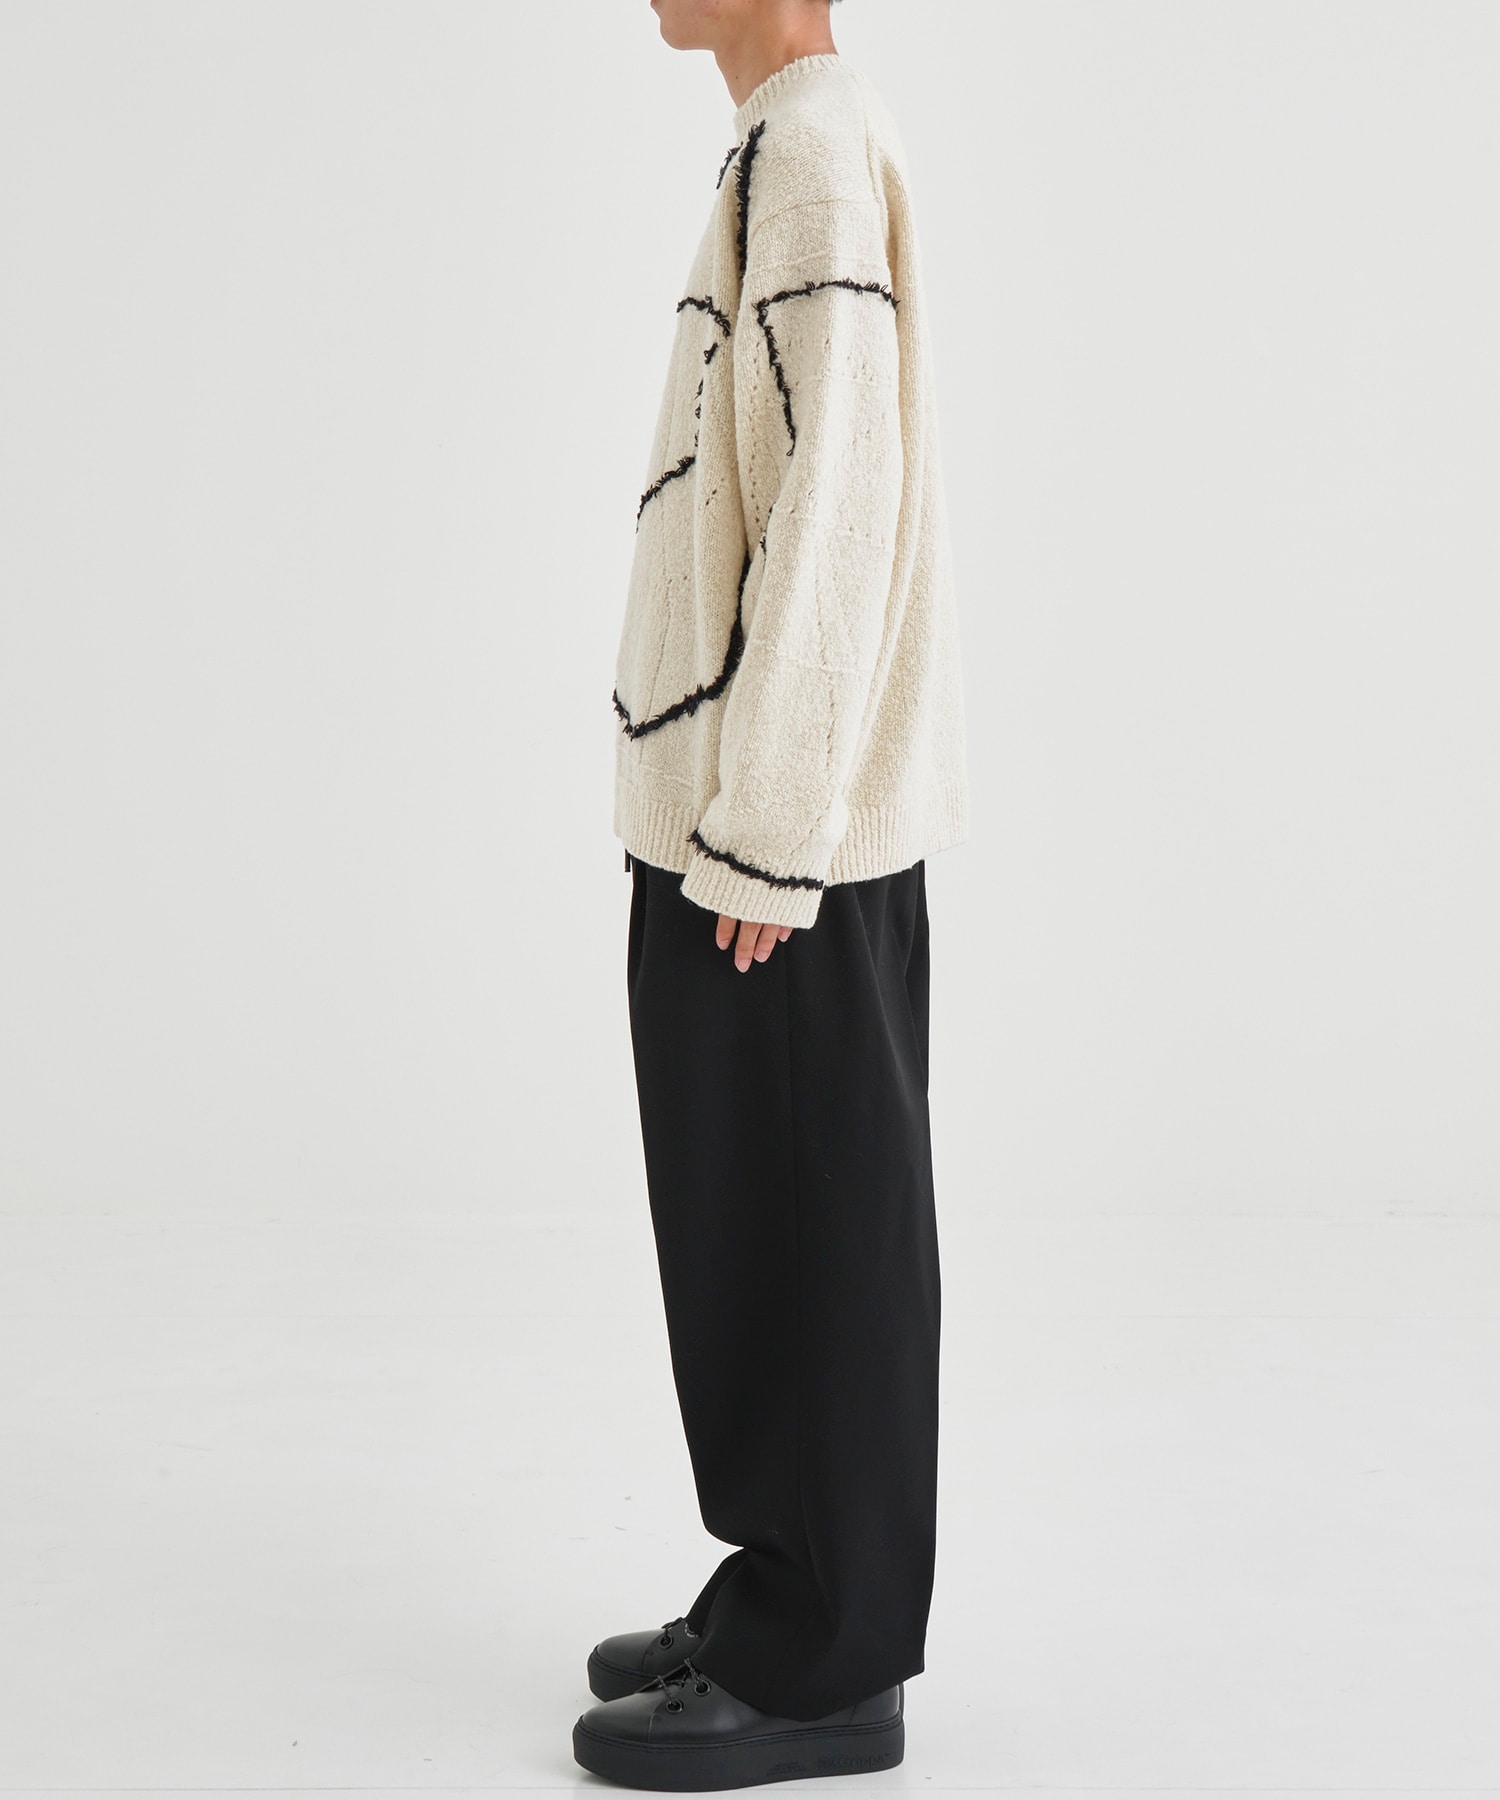 CONTINUOUS LINE EMBROIDERY SWEATER ｜ YOKE